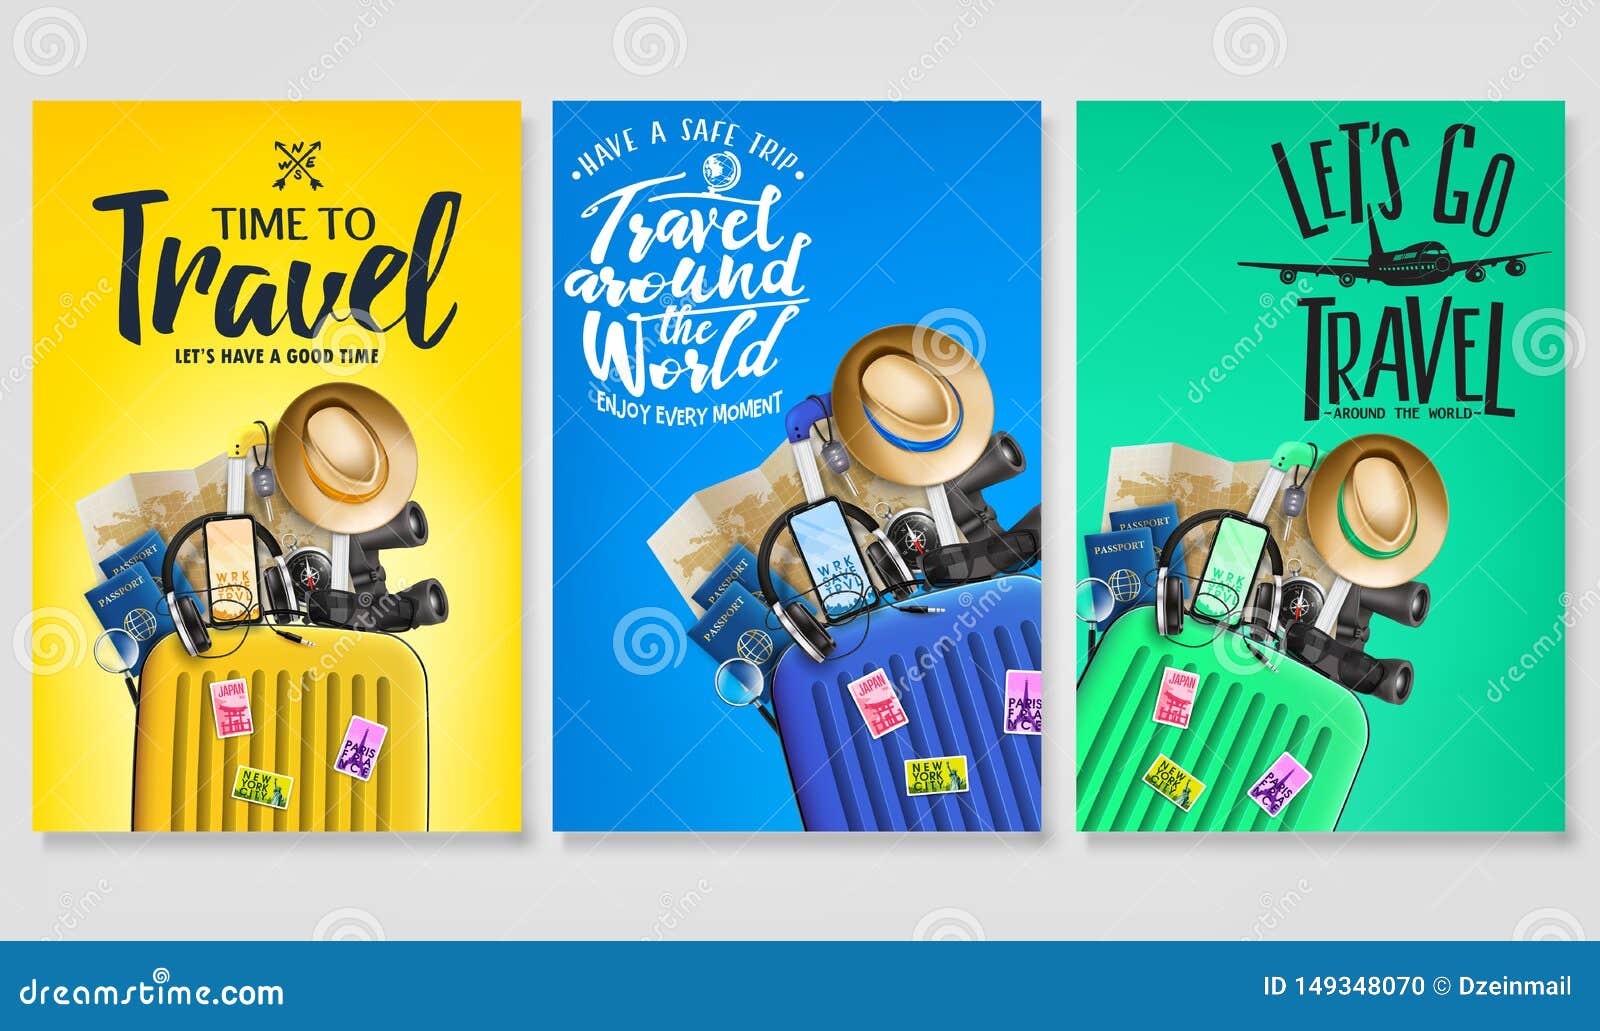 travel poster set template with traveling bag and message logo text in gradient background